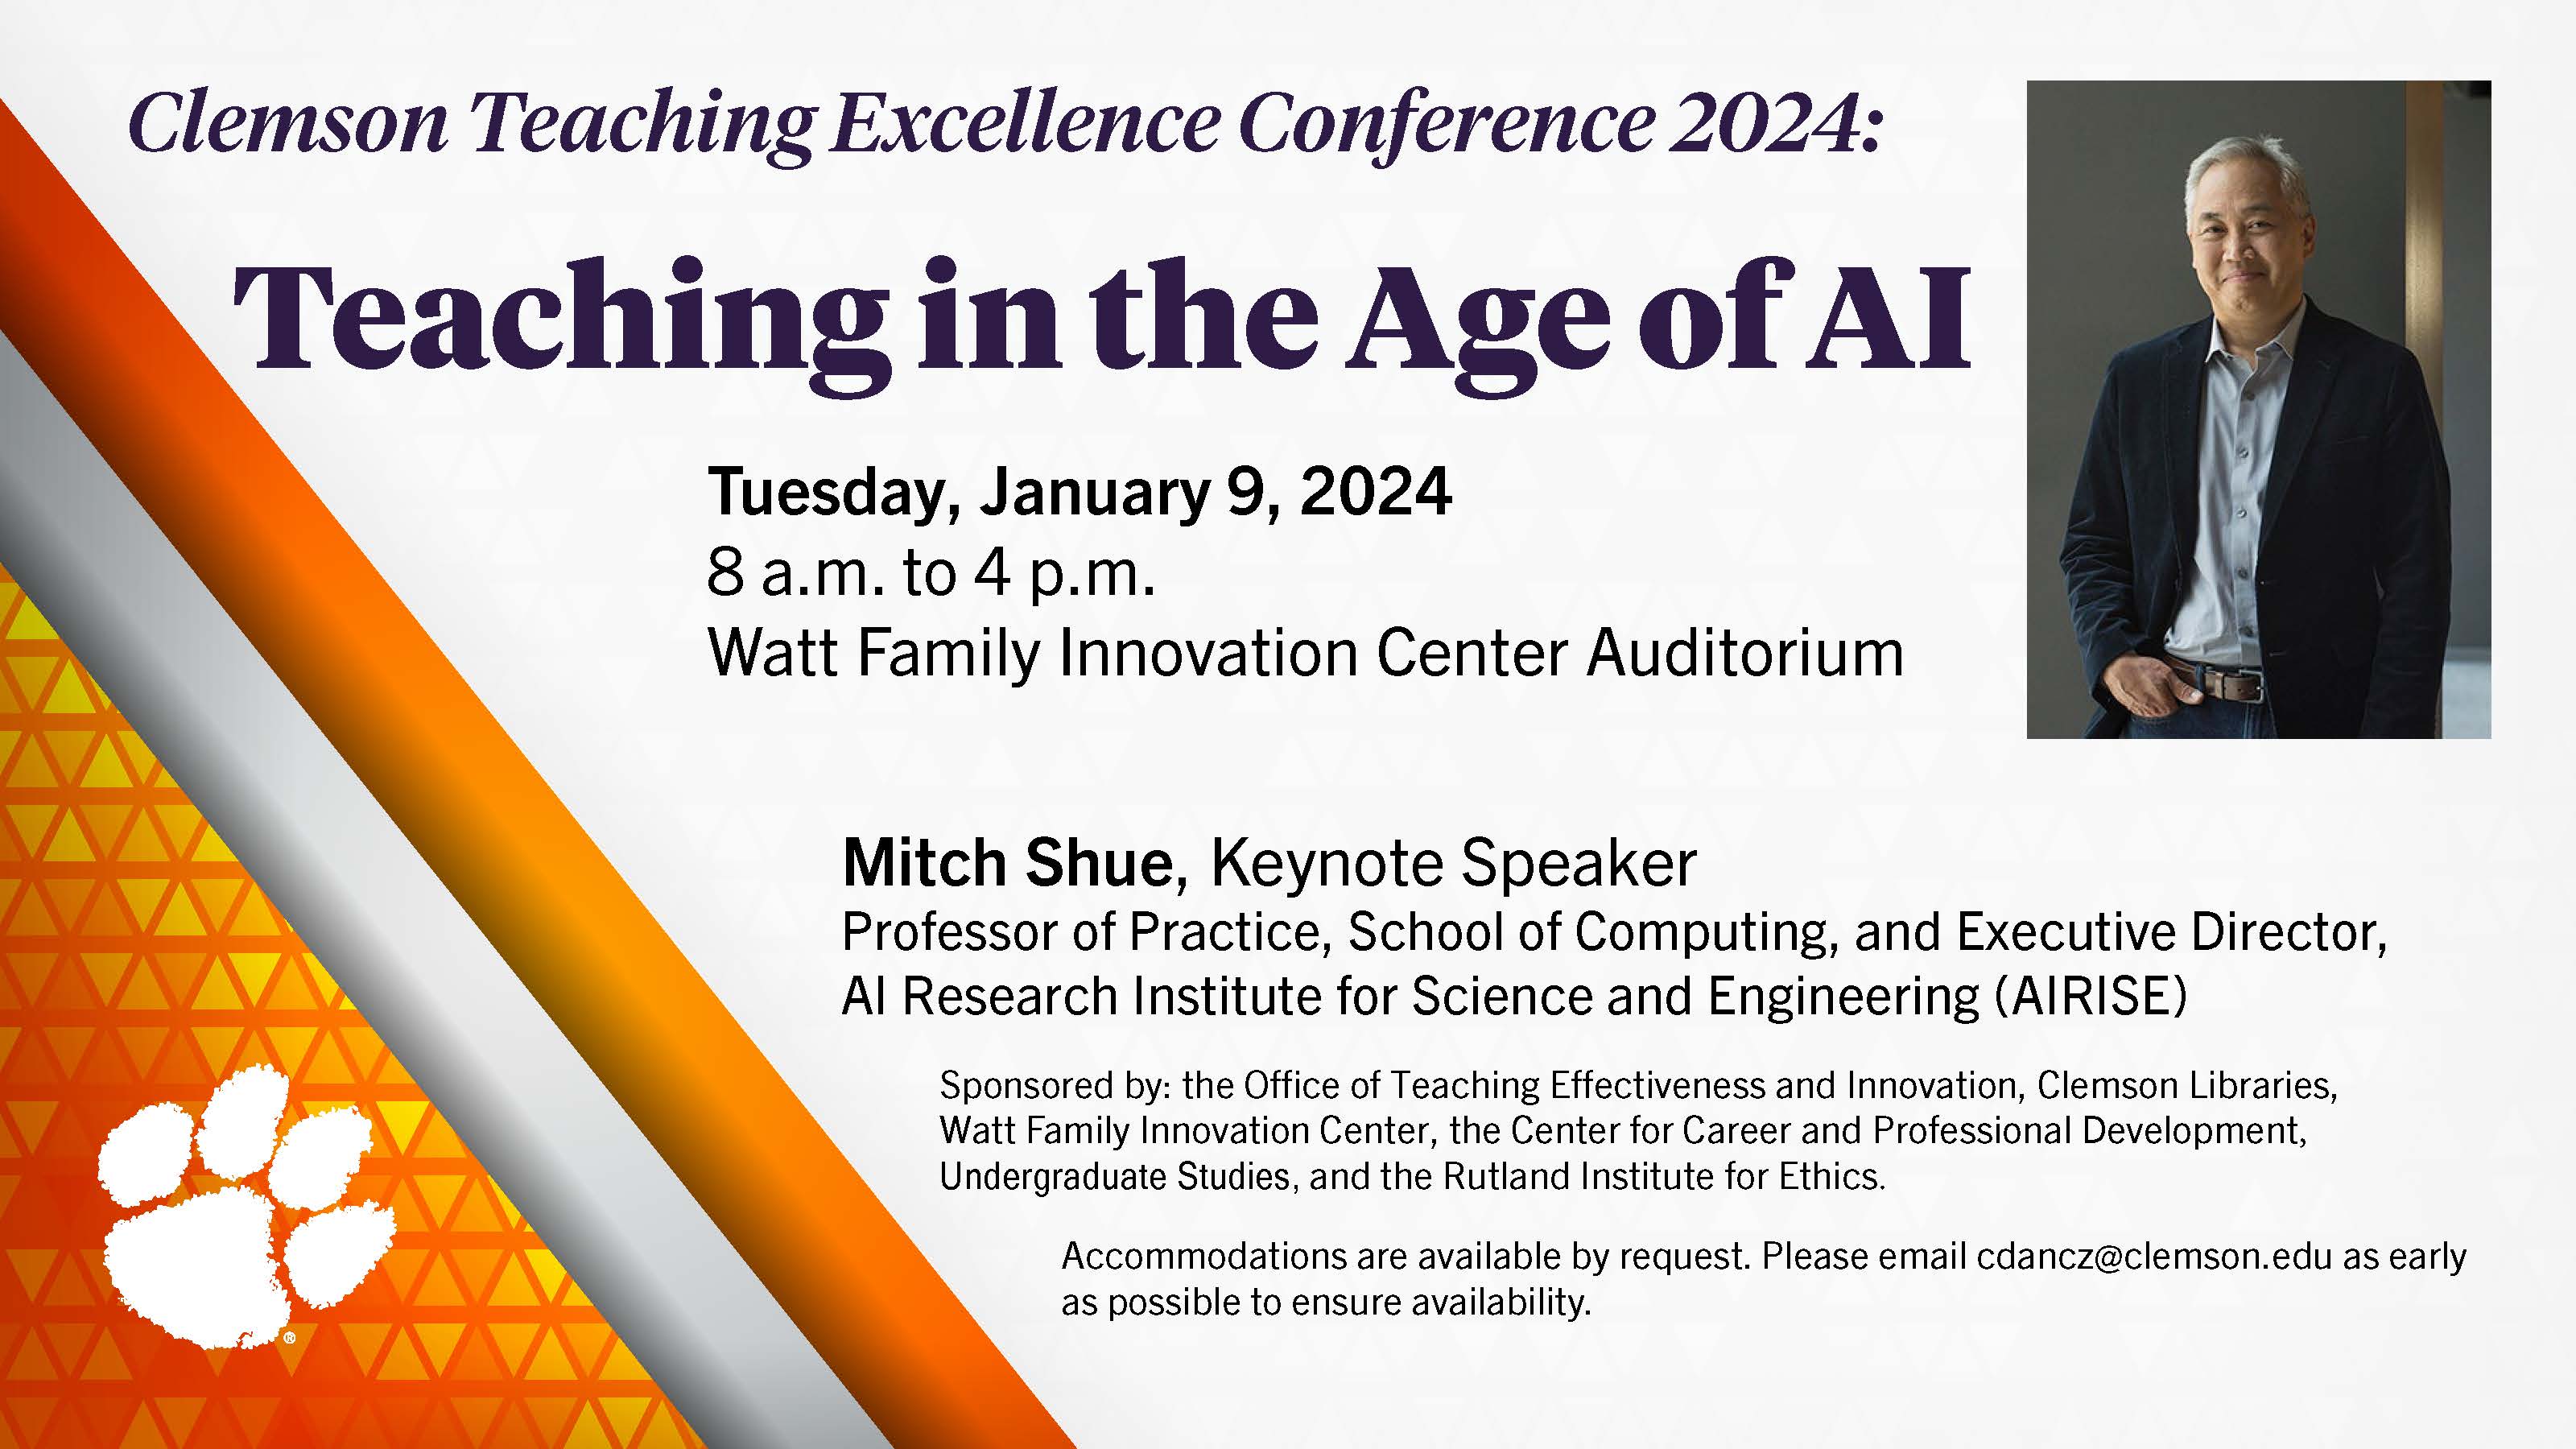 Clemson Teaching Excellence Conference 2024, Teaching in the Age of AI, Tuesday January 9 2024. 8 a.m. to 4 p.m. Watt Family Innovation Center Auditorium.  Mitch Shue, Keynote Speaker, professor of practice, School of Computing, and Executive Director, AI Research Institute for Science and Engineering (AIRISE).  Sponsored by the office of Teaching Effectiveness and Innovation, Clemson Libraries, Watt Family Innovation Center, the Center for Career and Professional Development, Undergraduate Studies, and the Rutland Institute for Ethics. 